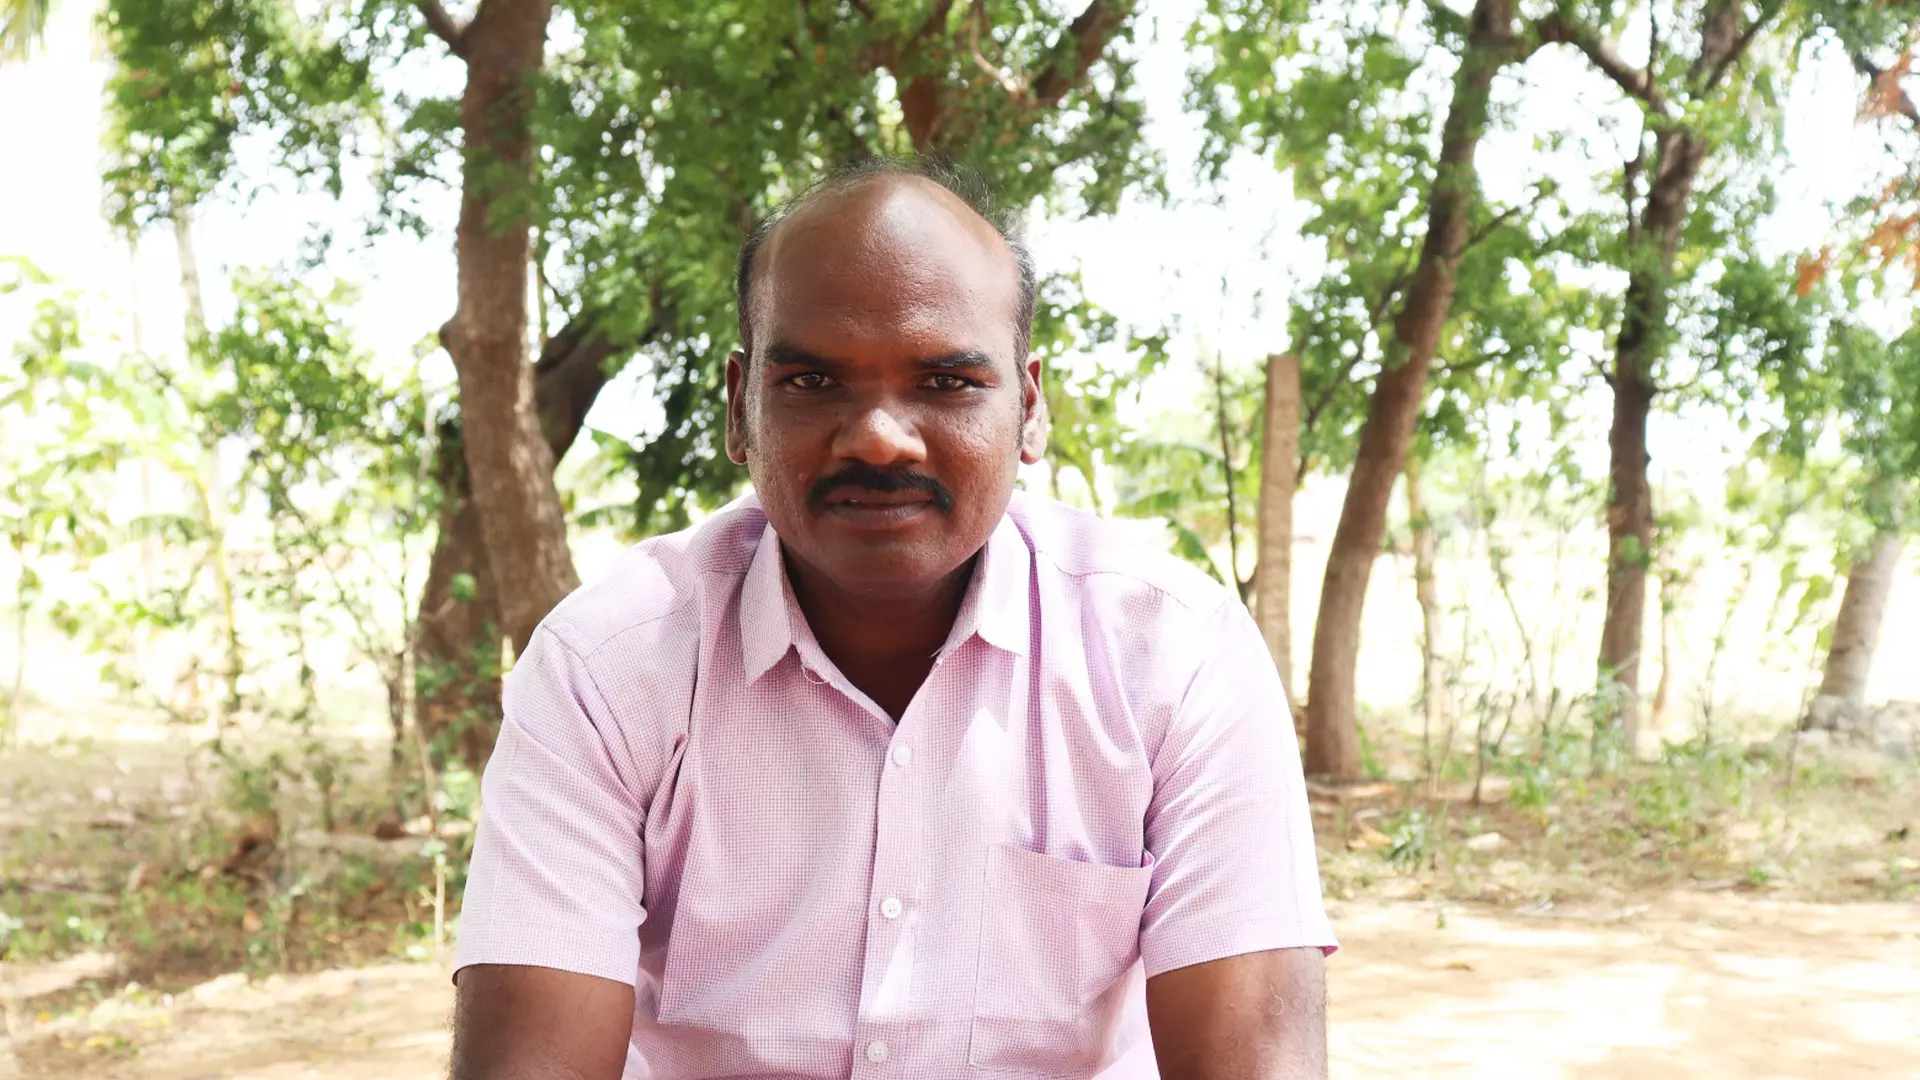 Virumandi, a native of Jyothimanickam, a village 48 km from Madurai, was a student at a college in Madurai when Pitchappan and his team stumbled on him to take samples for the Genographic Project in the late 1990s. 